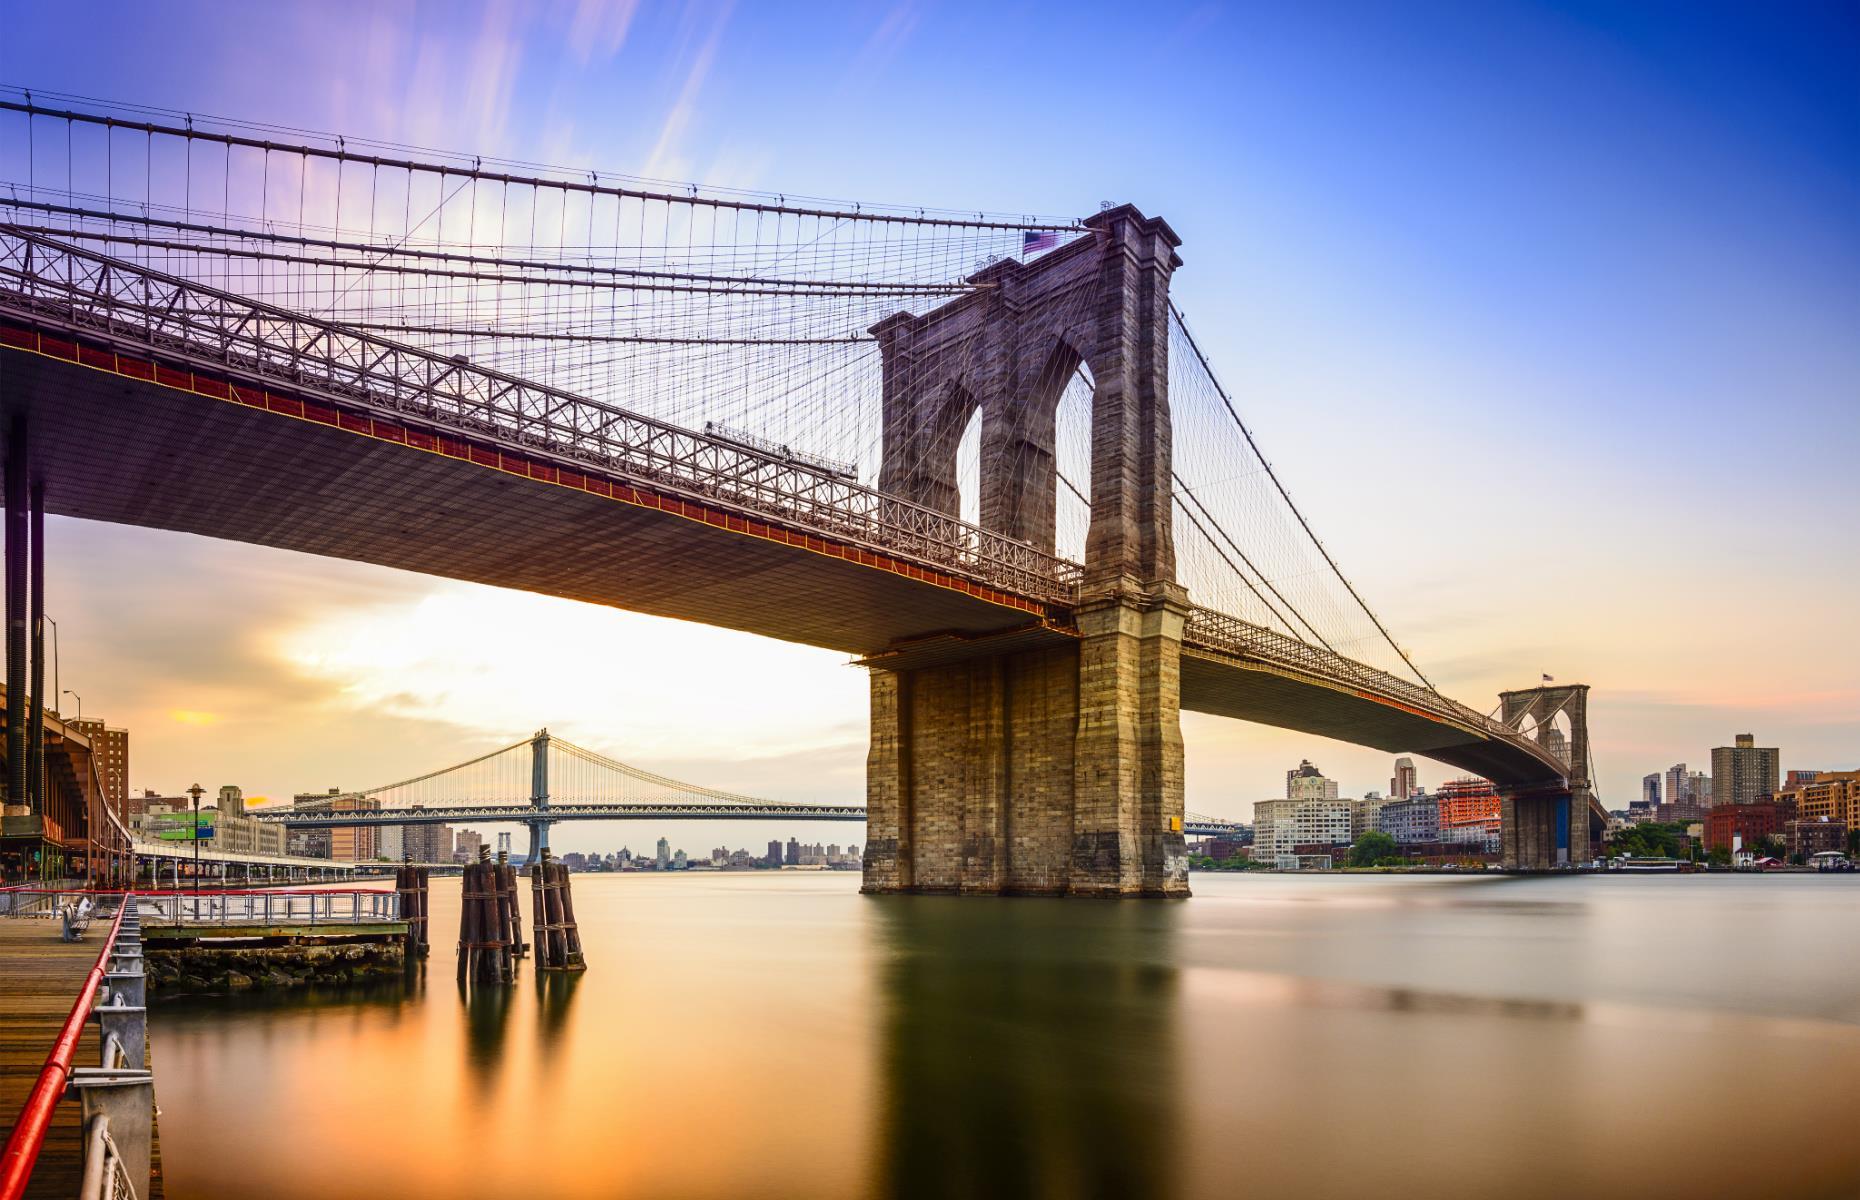 Take In the Gorgeous View From These Awe-Inspiring Bridges